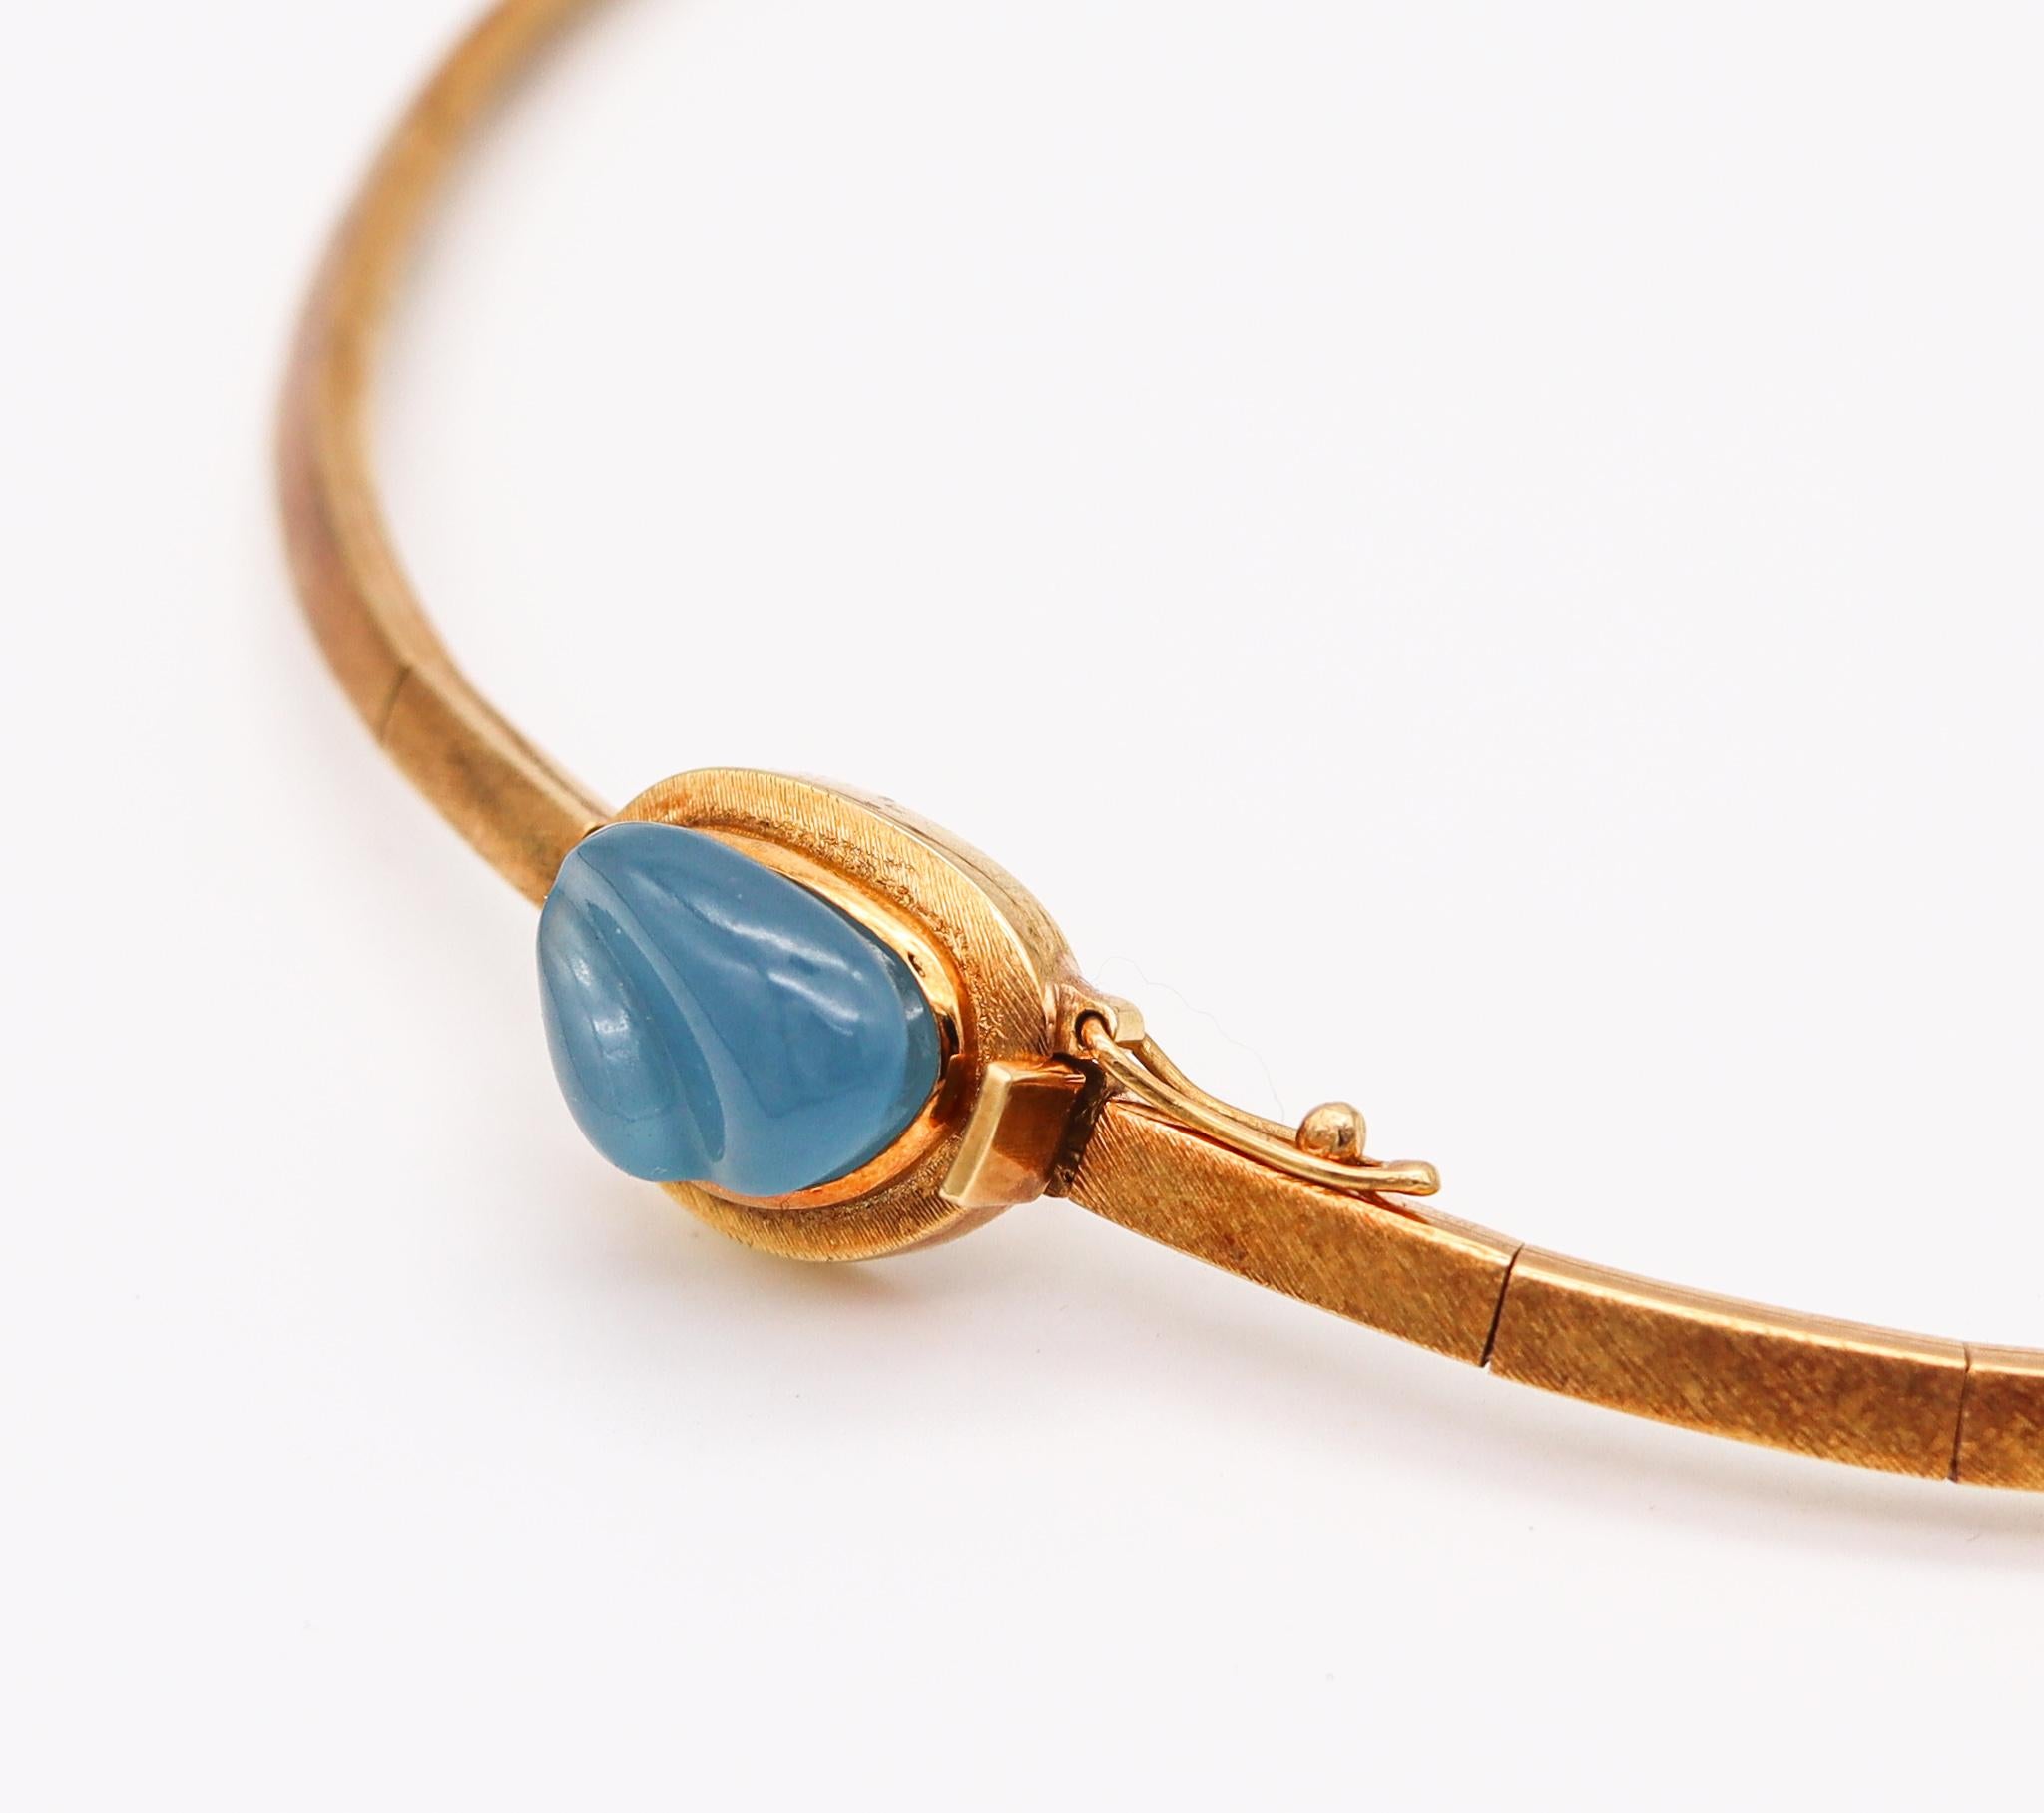 Modernist Burle Marx 1968 Brazil Necklace In 18Kt Yellow Gold With Forma Livre Aquamarine